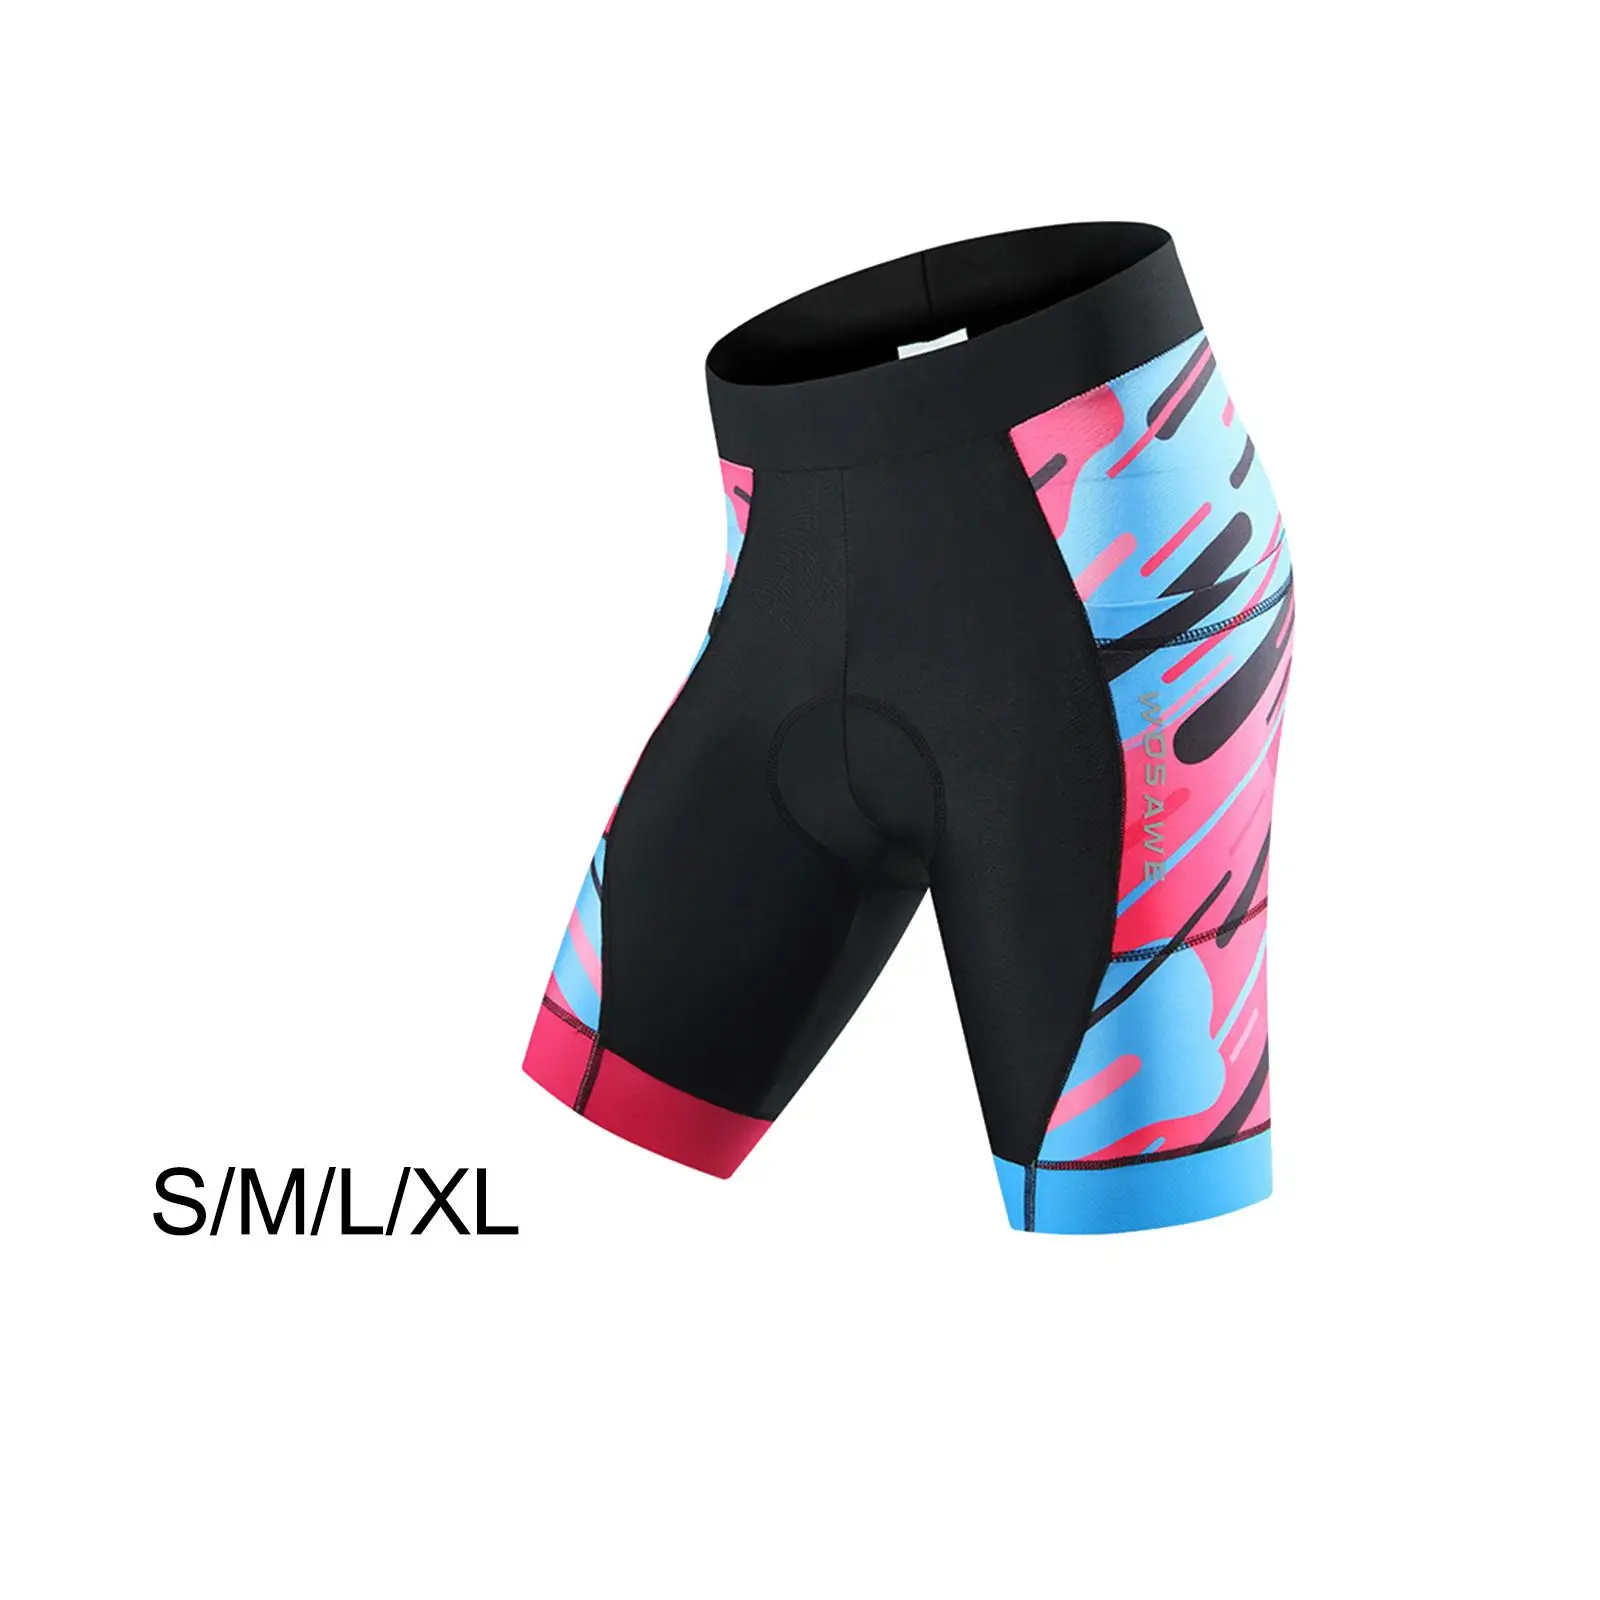 Cycling Clothing Anti Slip Padded Bike Shorts for Running Volleyball Dance